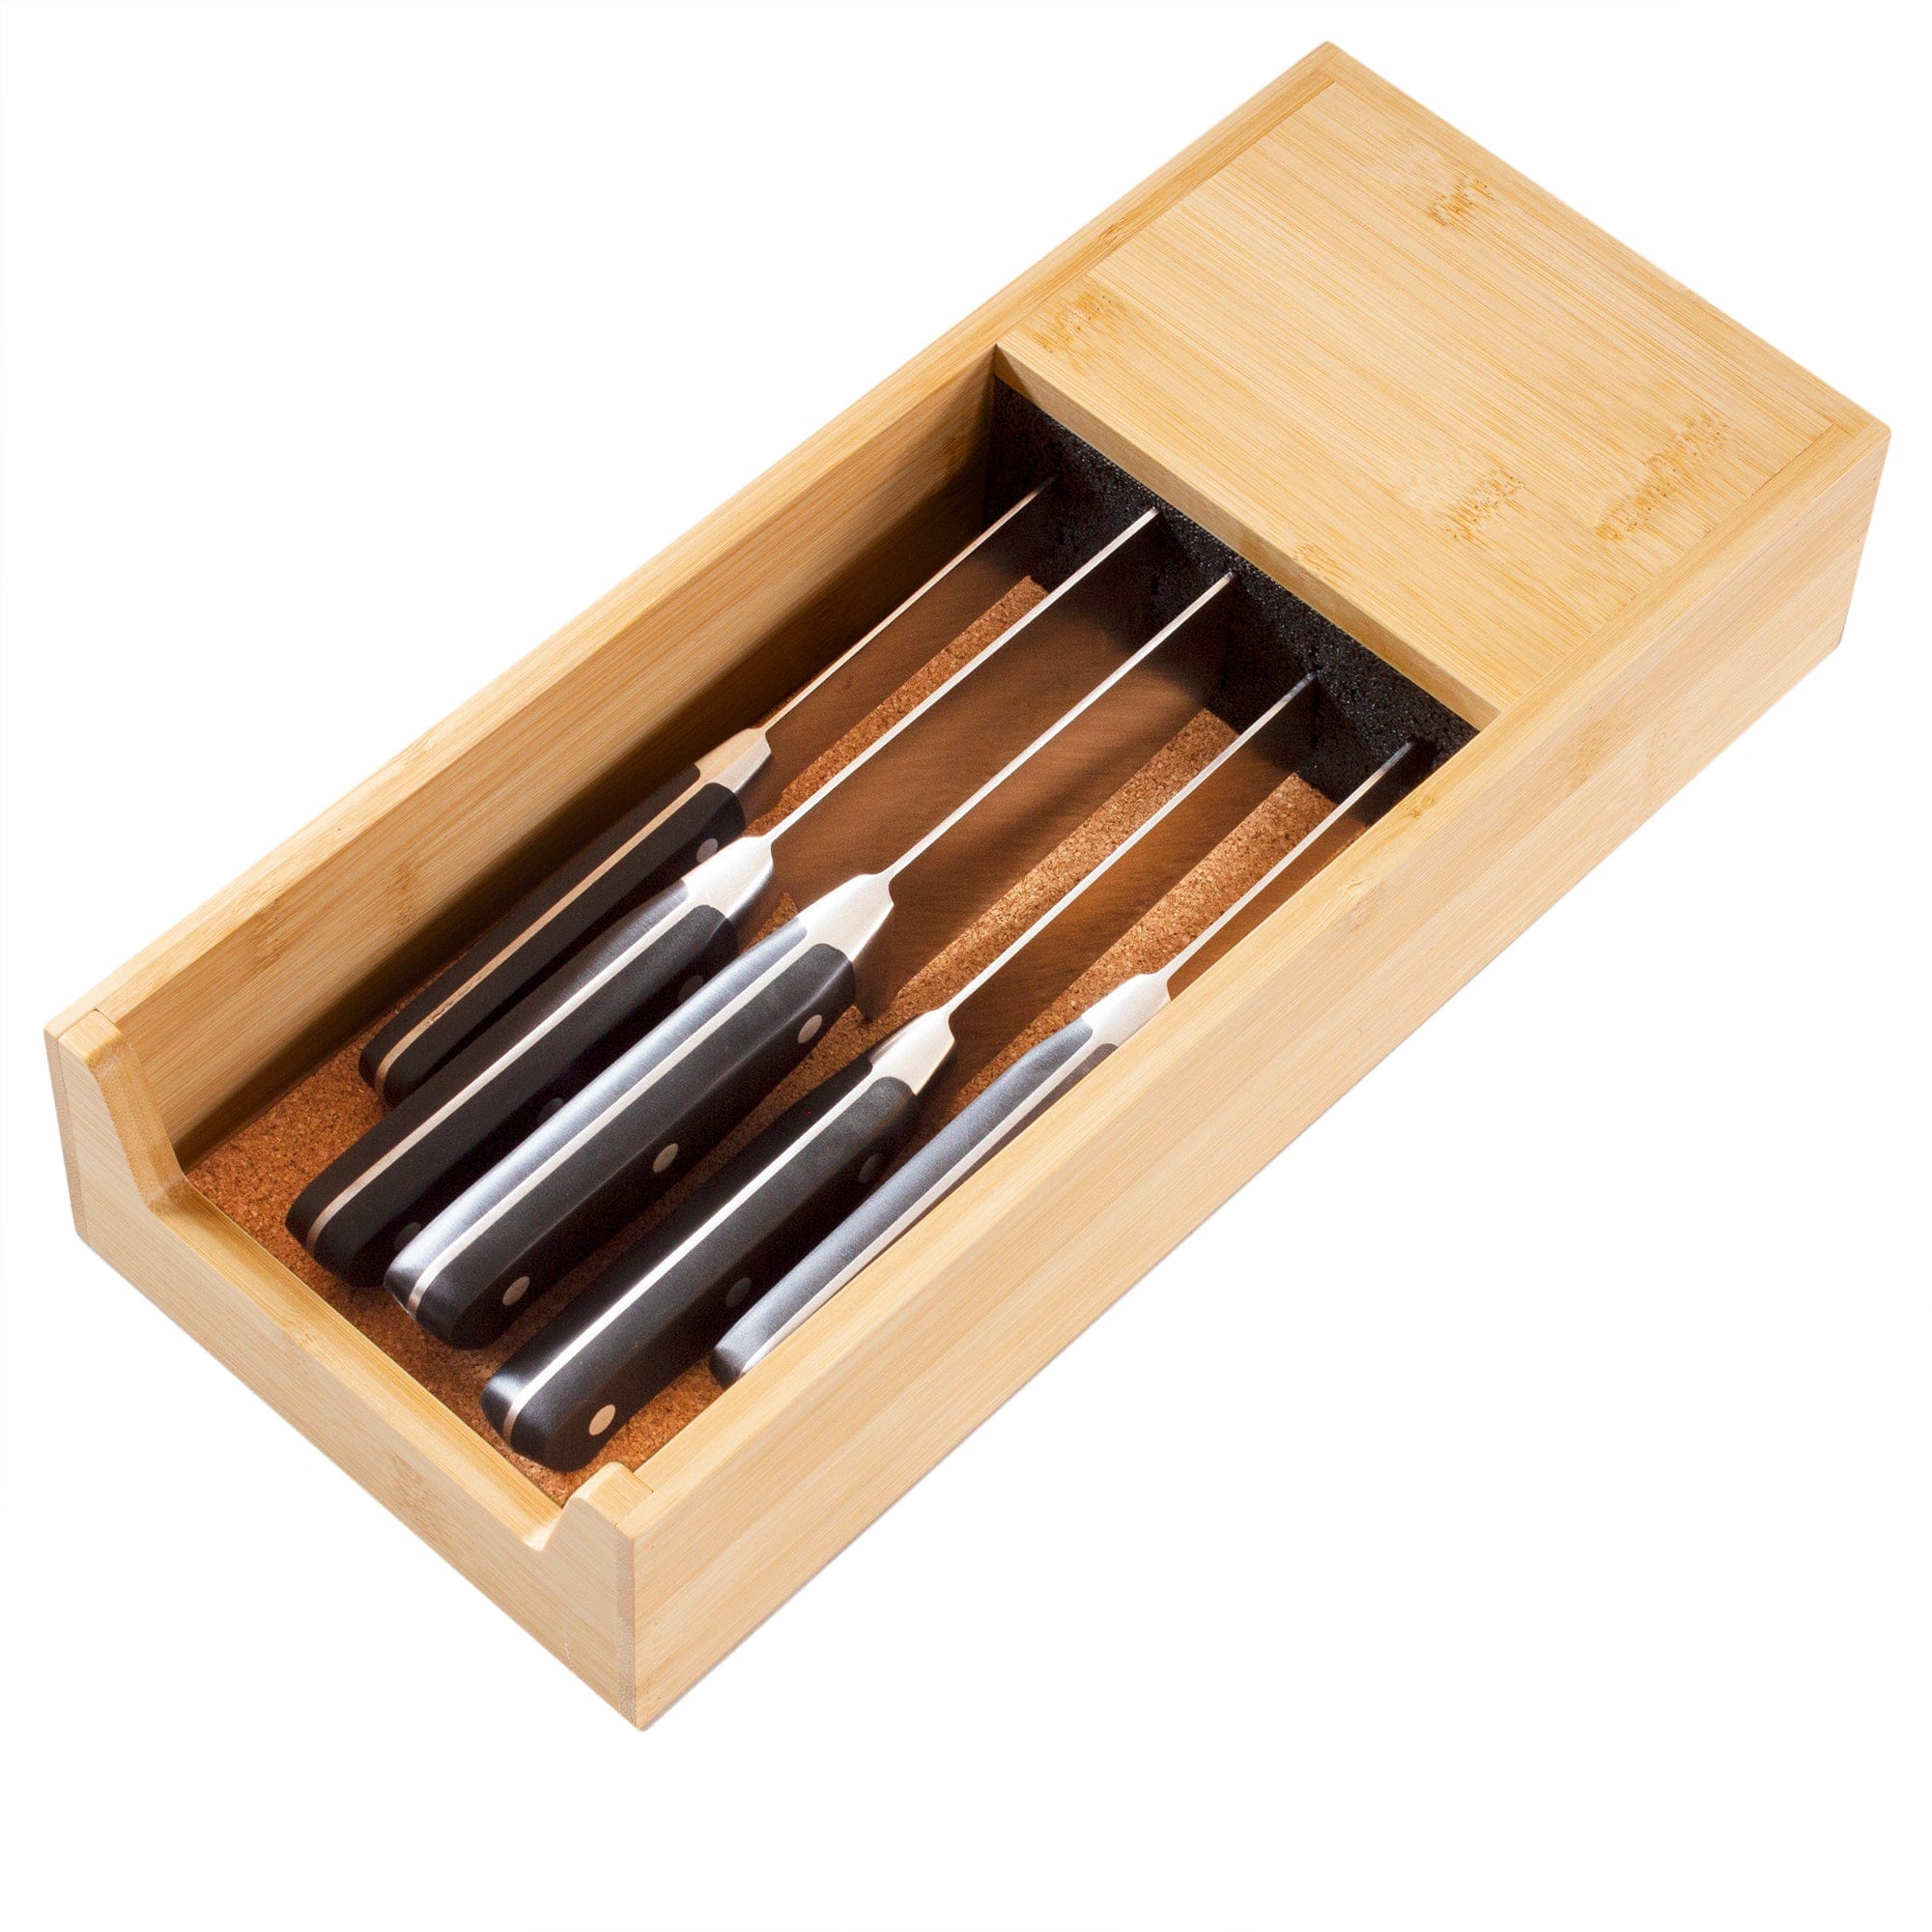 Knife Drawer Store Kitchen Drawer Organizer Tray for Knives Knife